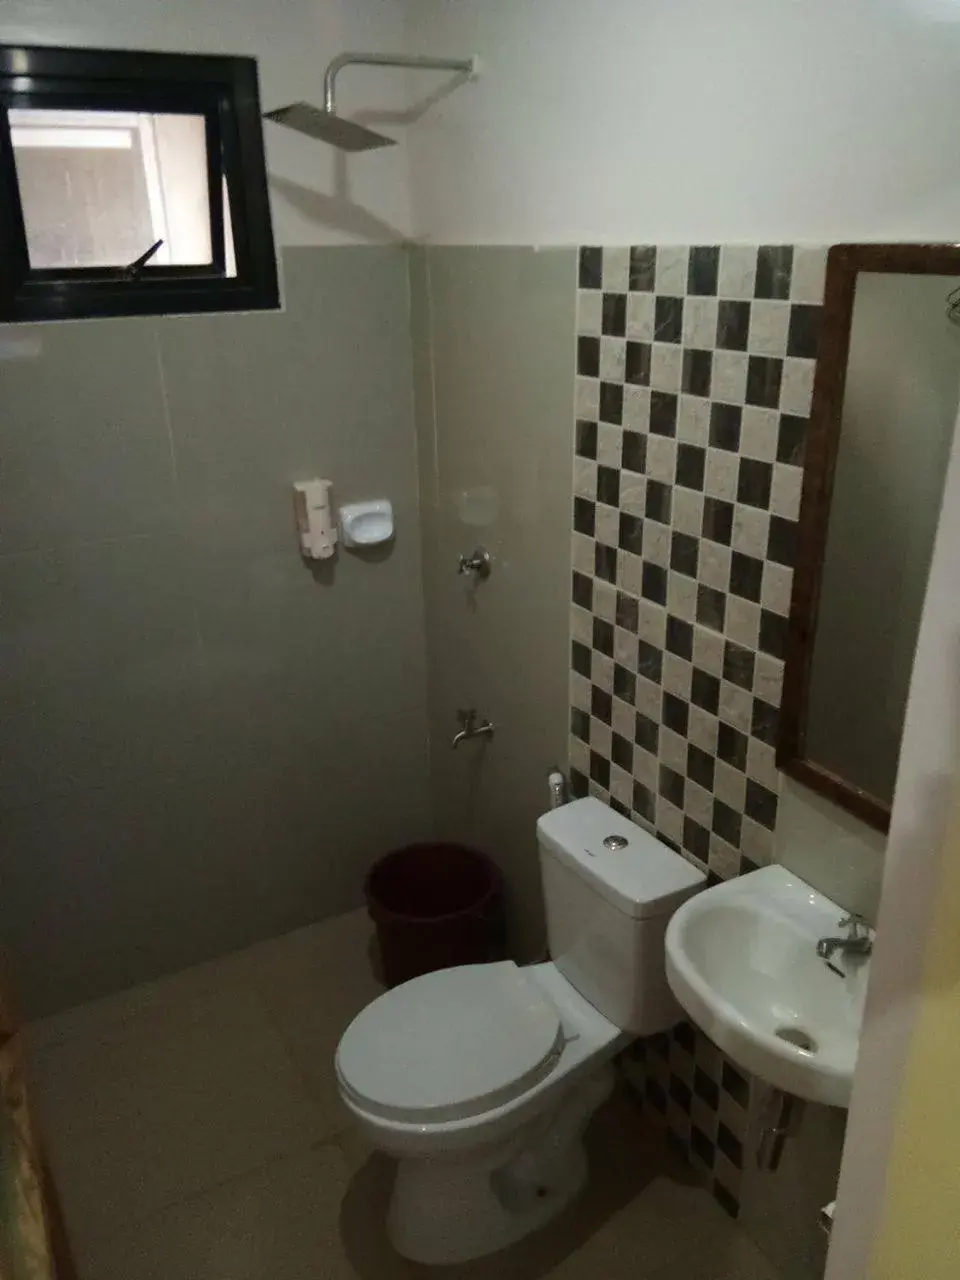 Bathroom in Mayon Lodging House